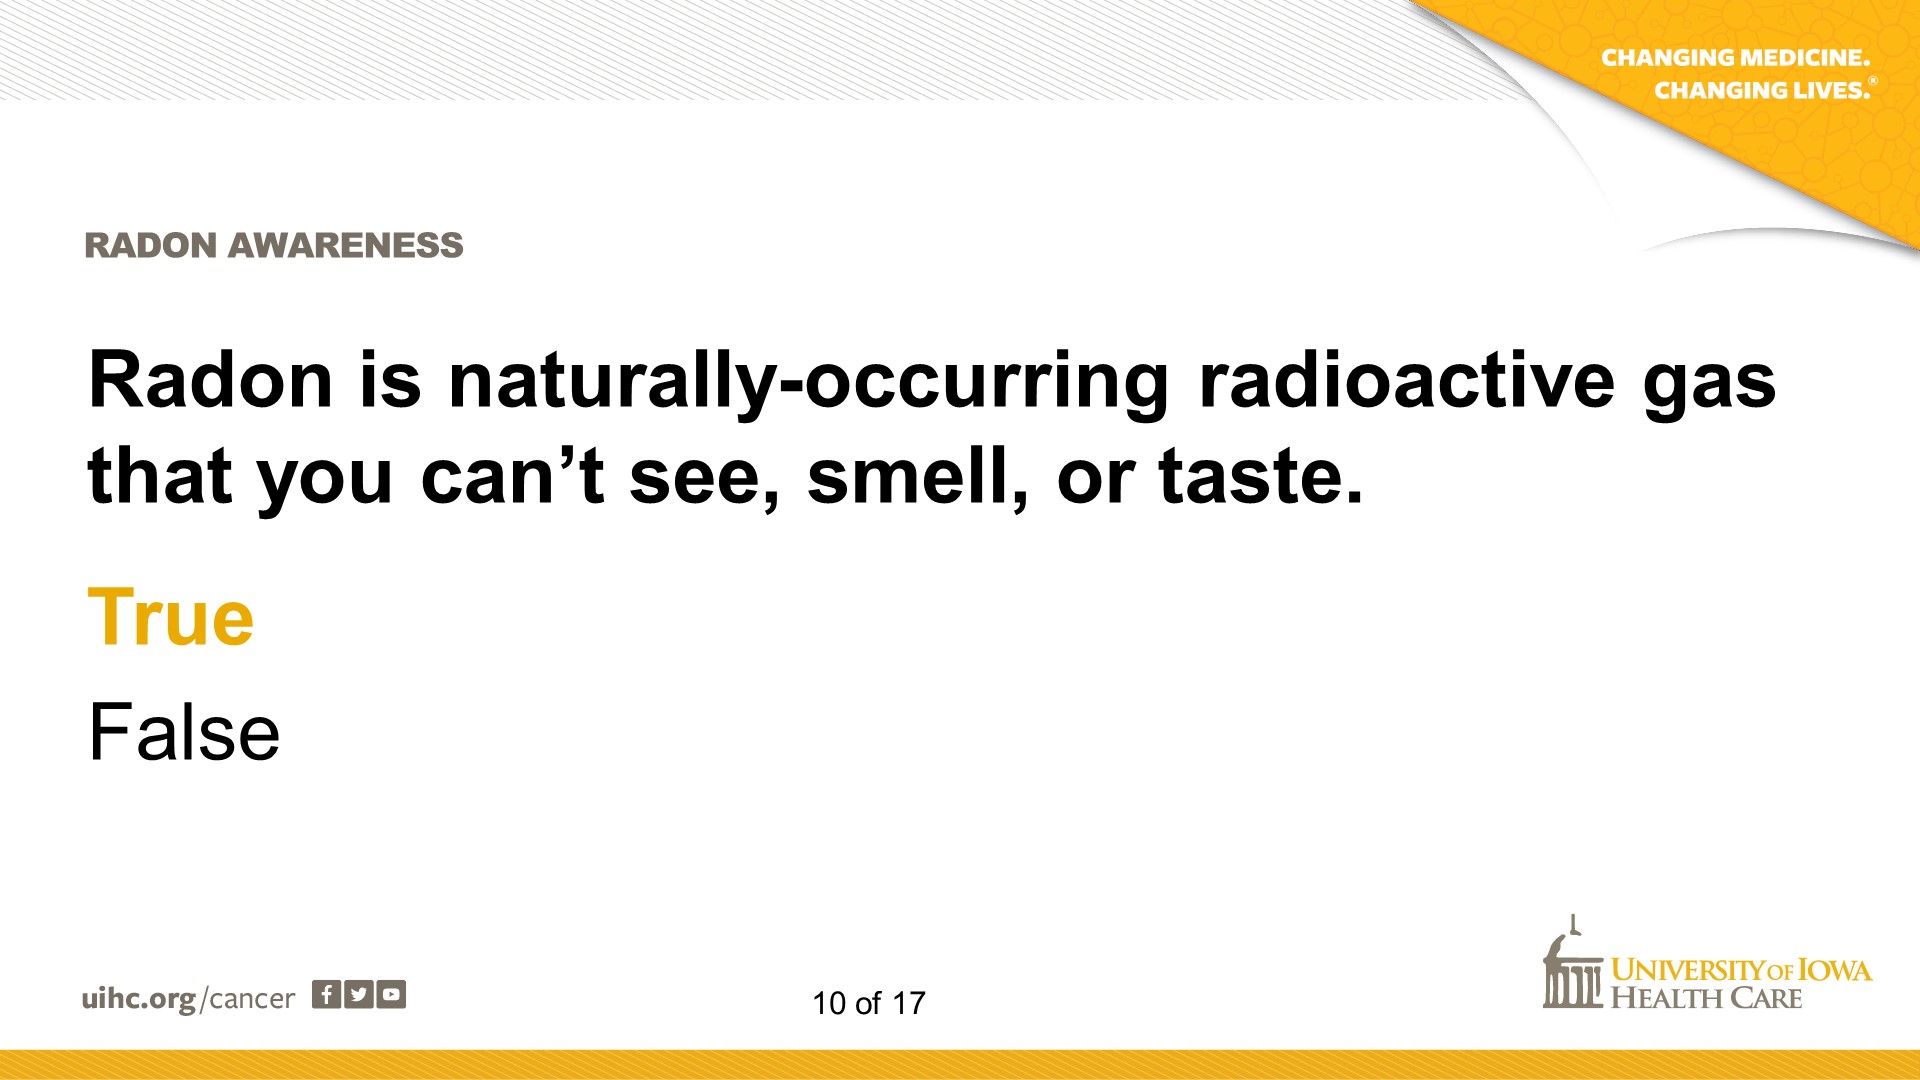 Radon is naturally-occurring radioactive gas that you can’t see, smell, or taste. TRUE